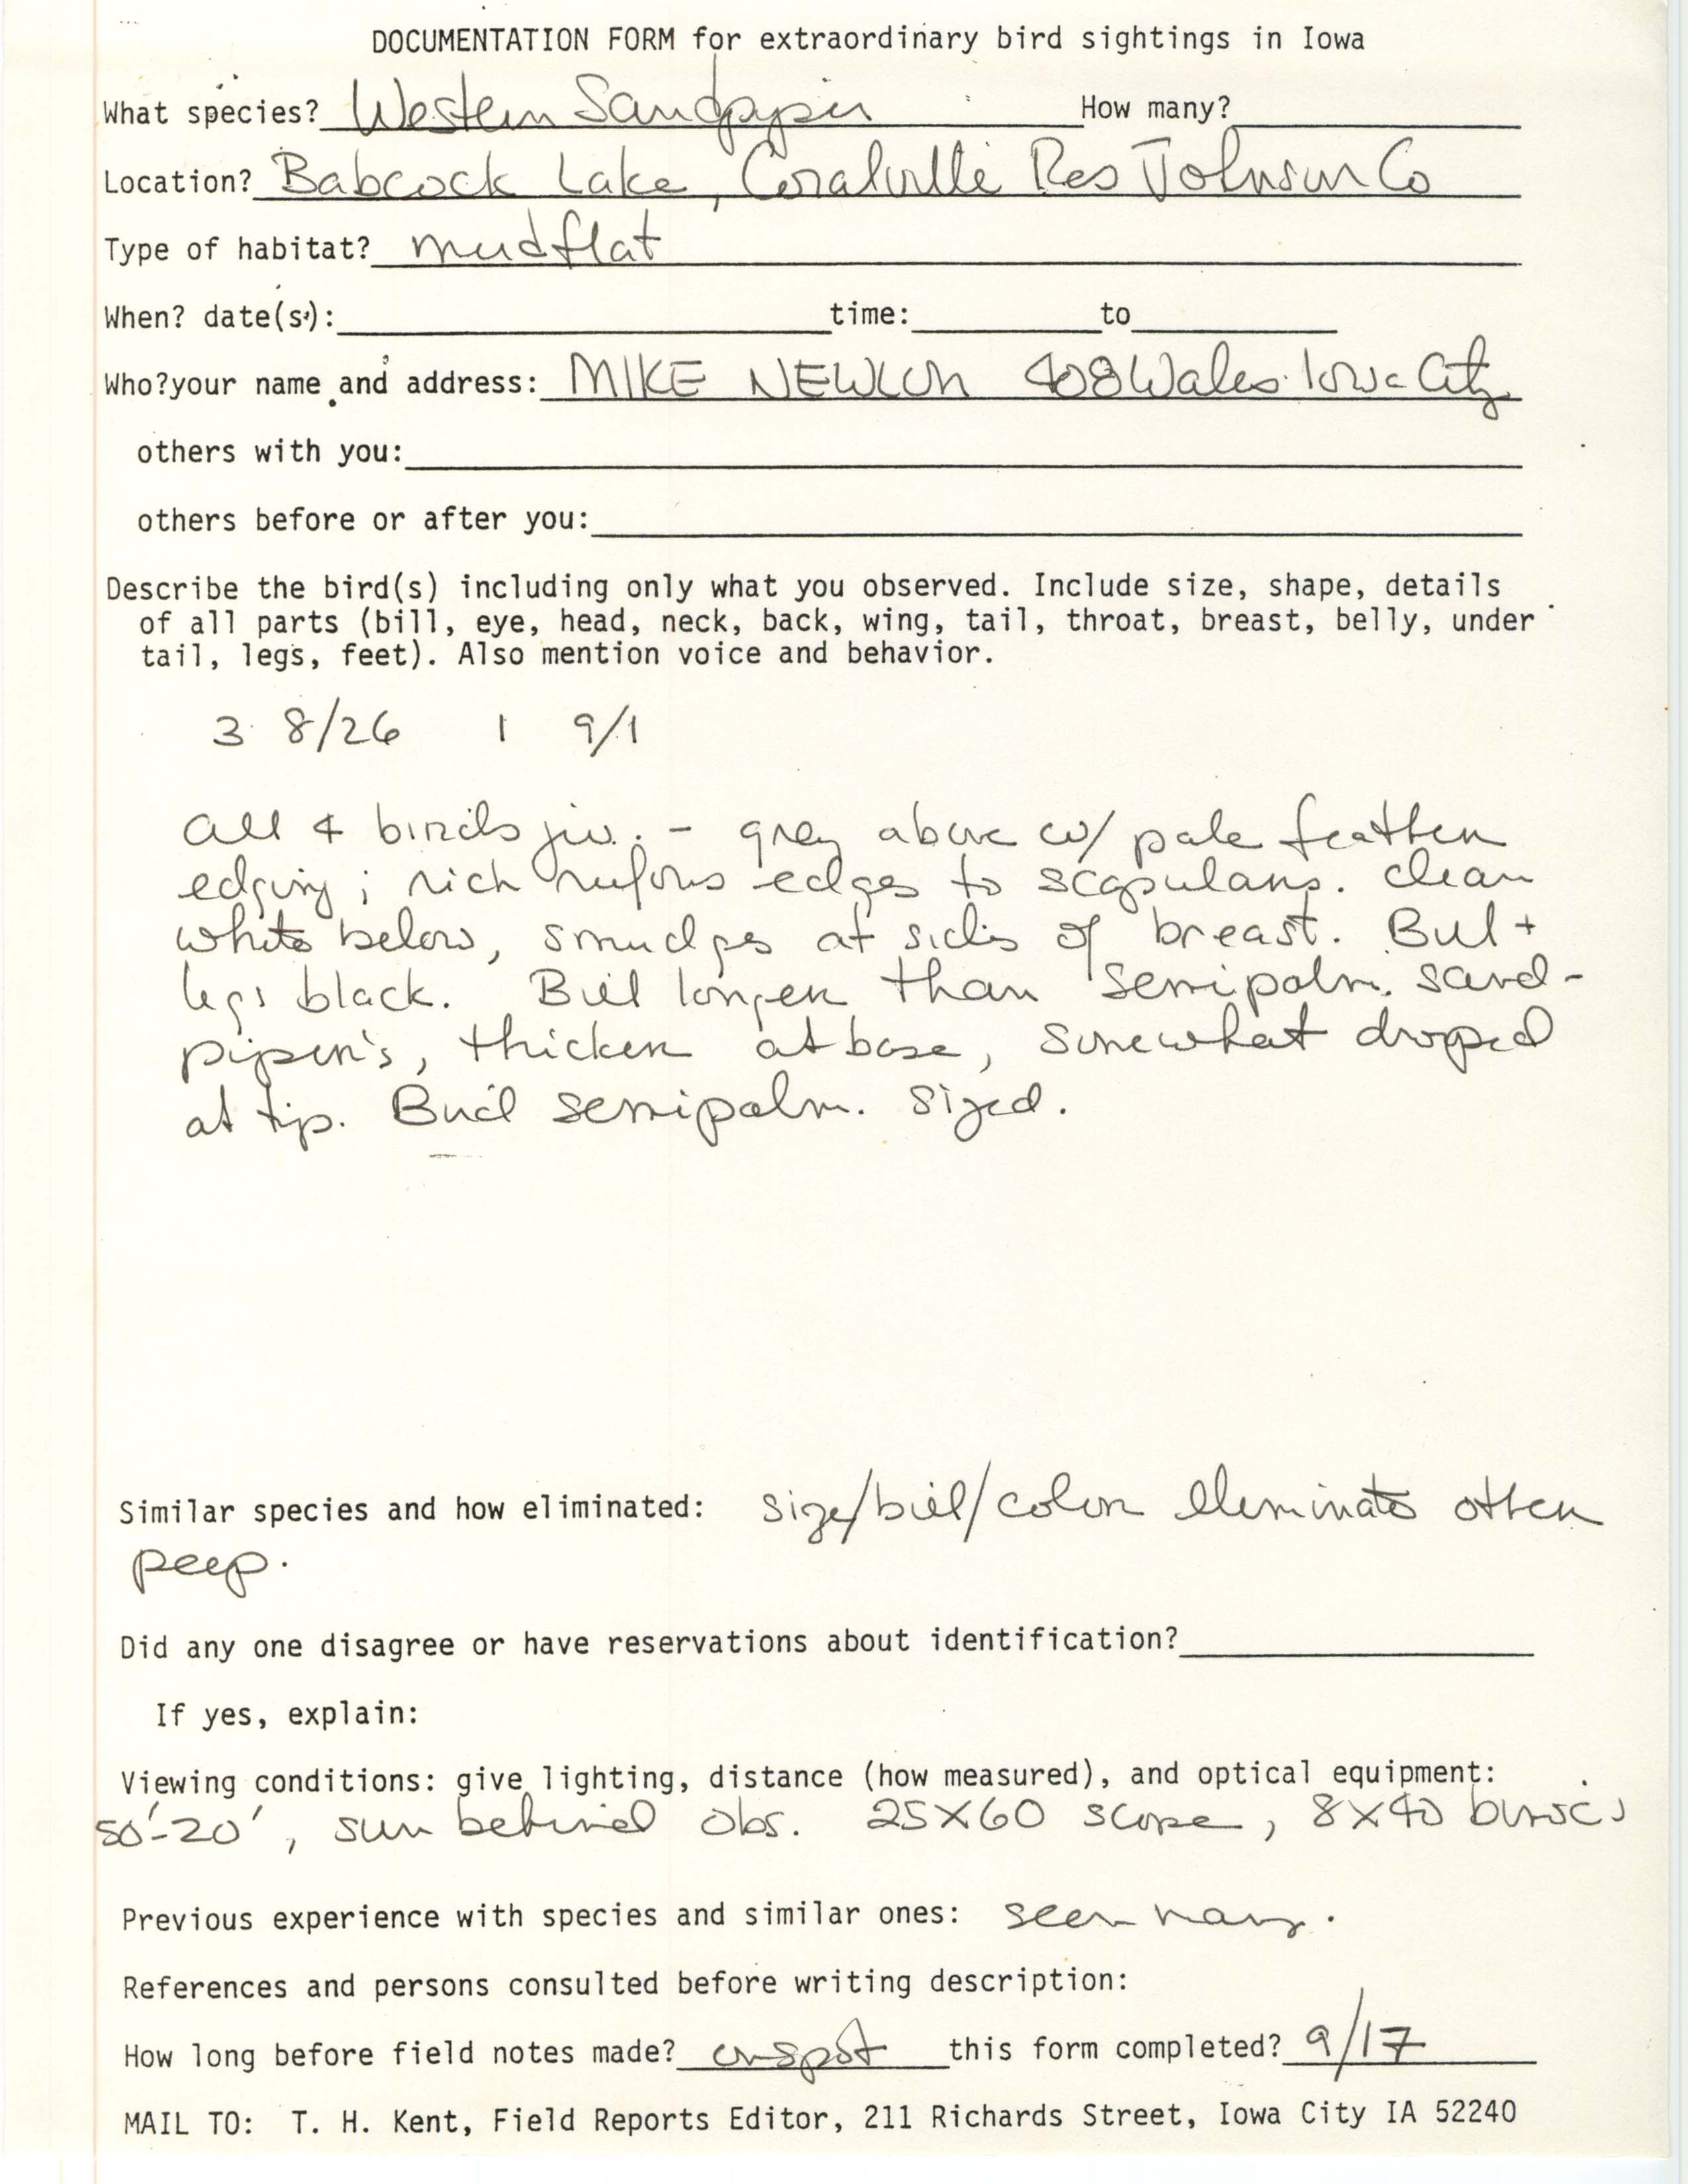 Rare bird documentation form for Western Sandpiper at Babcock Lake in unknown year